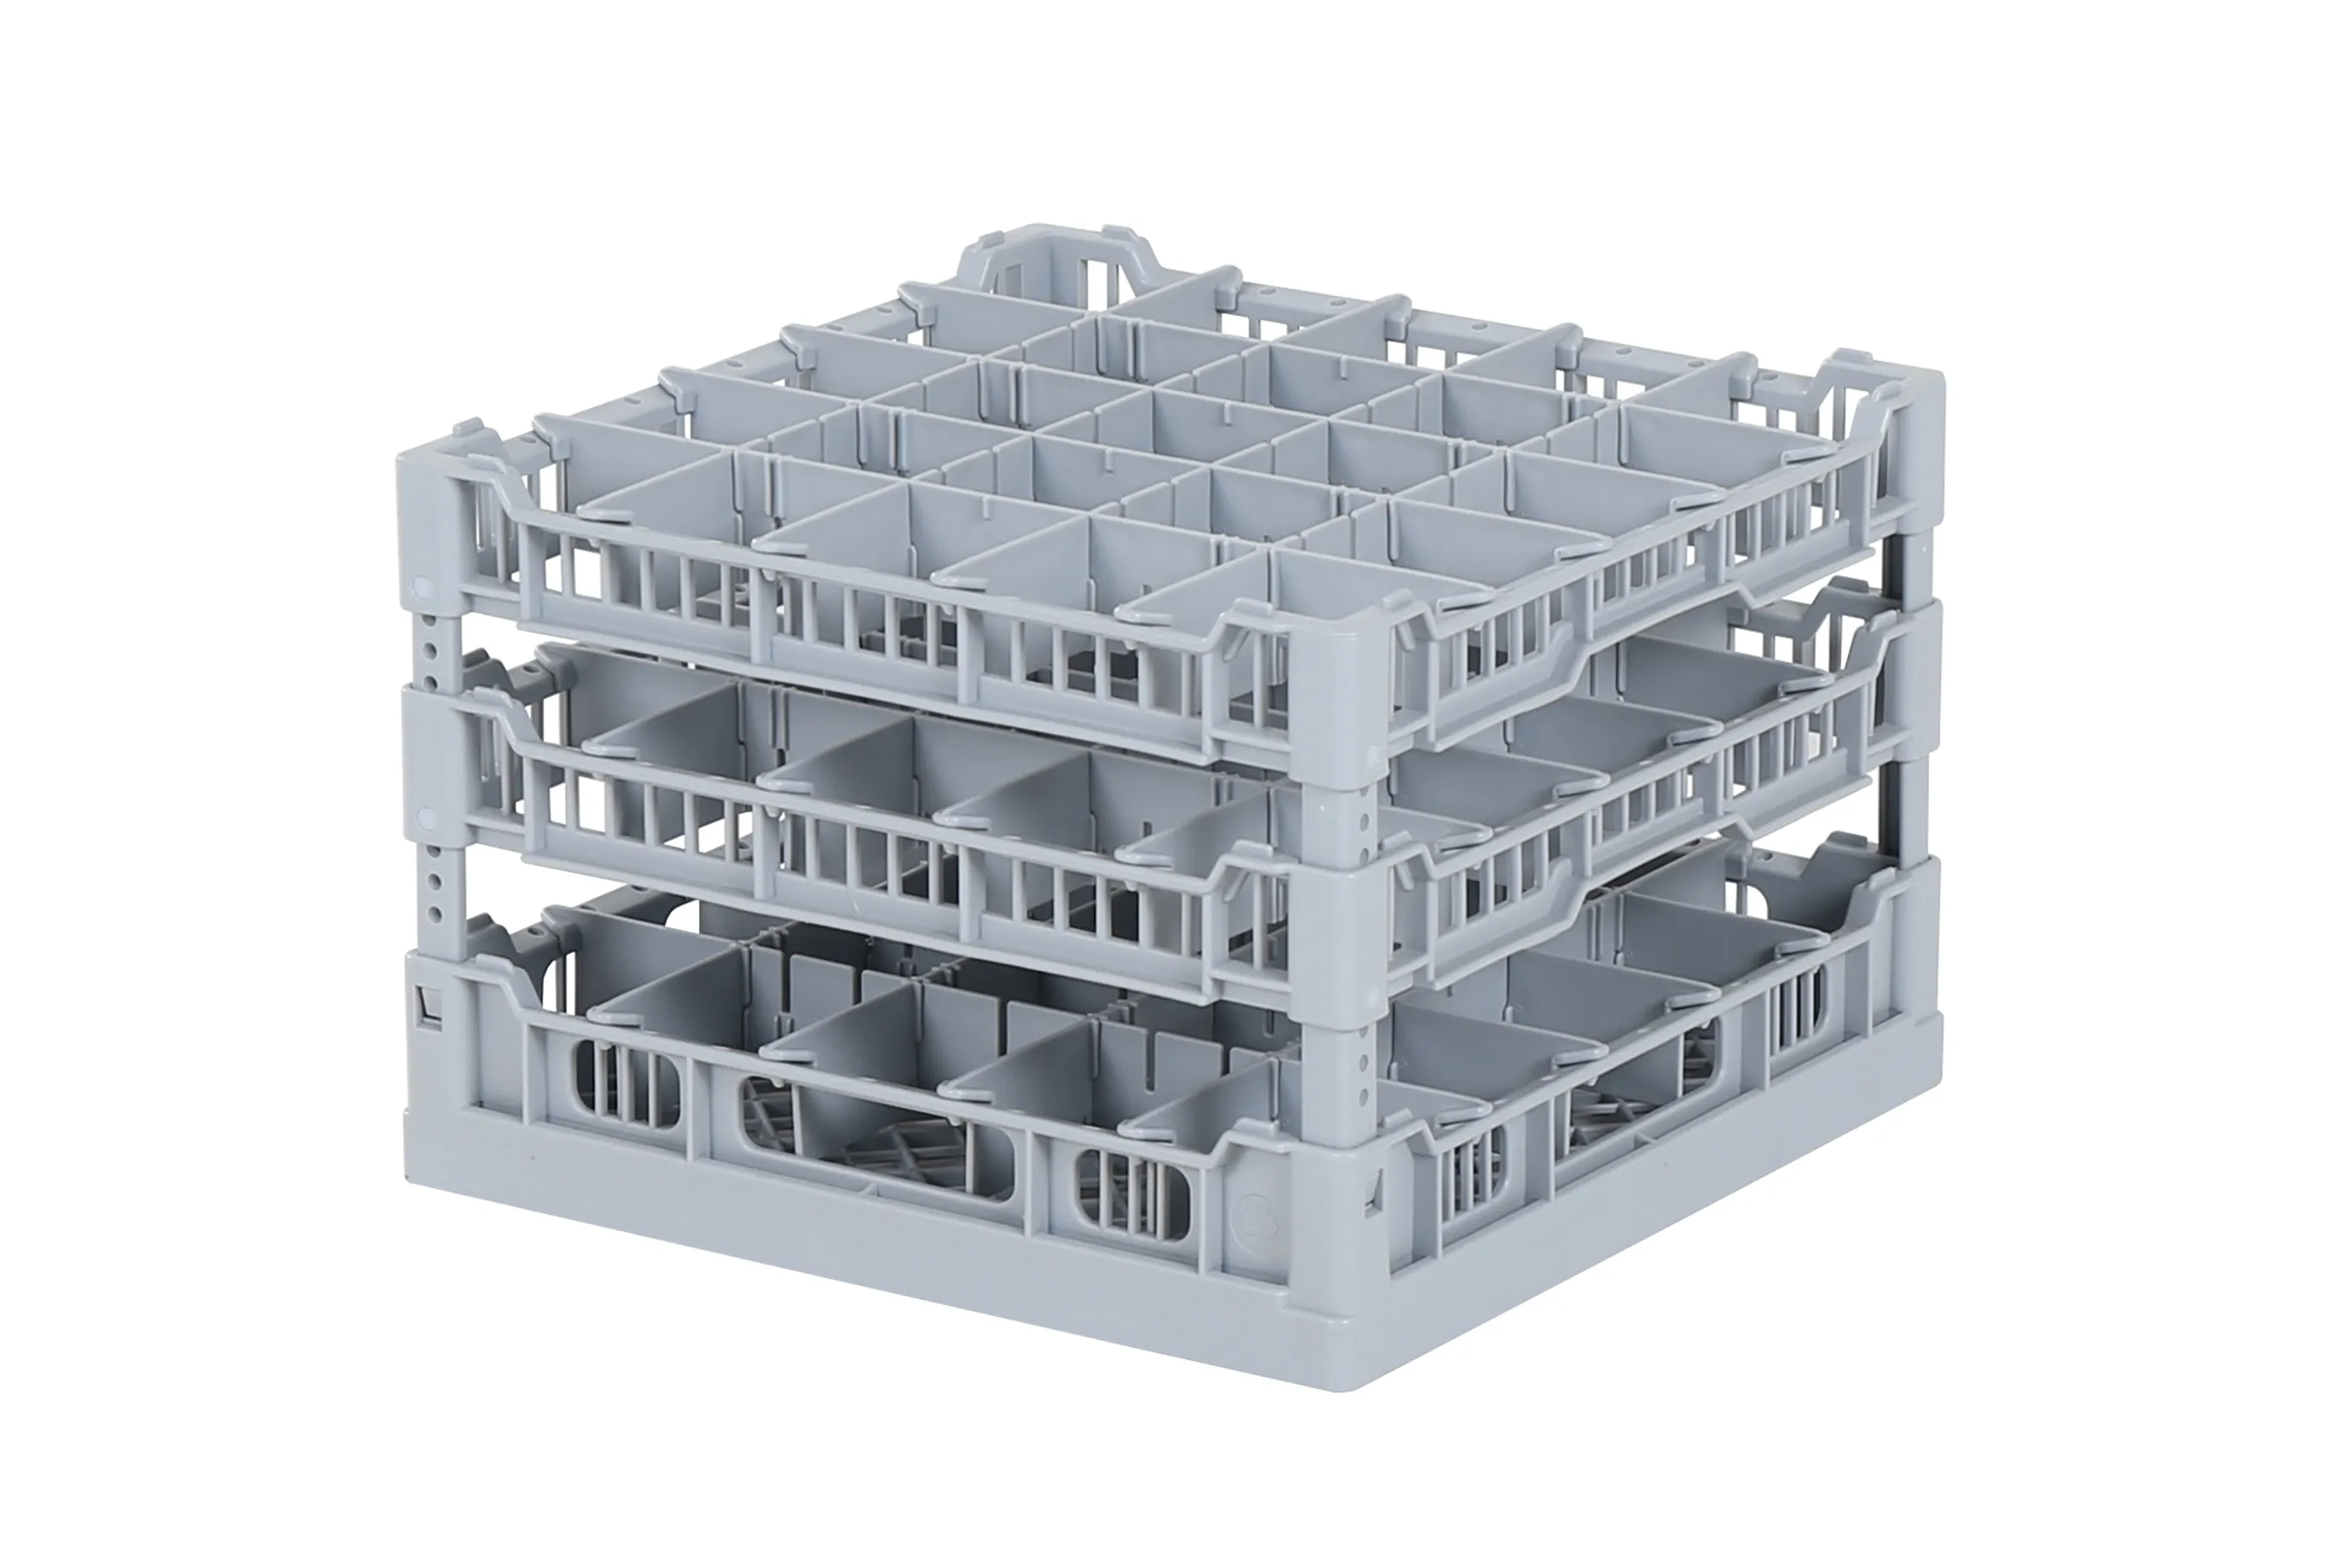 Dishwasher basket 400 x 400 mm - for glass heights from 241 to 252 mm - with 5 x 5 compartmentalization - maximum glass diameter 68mm